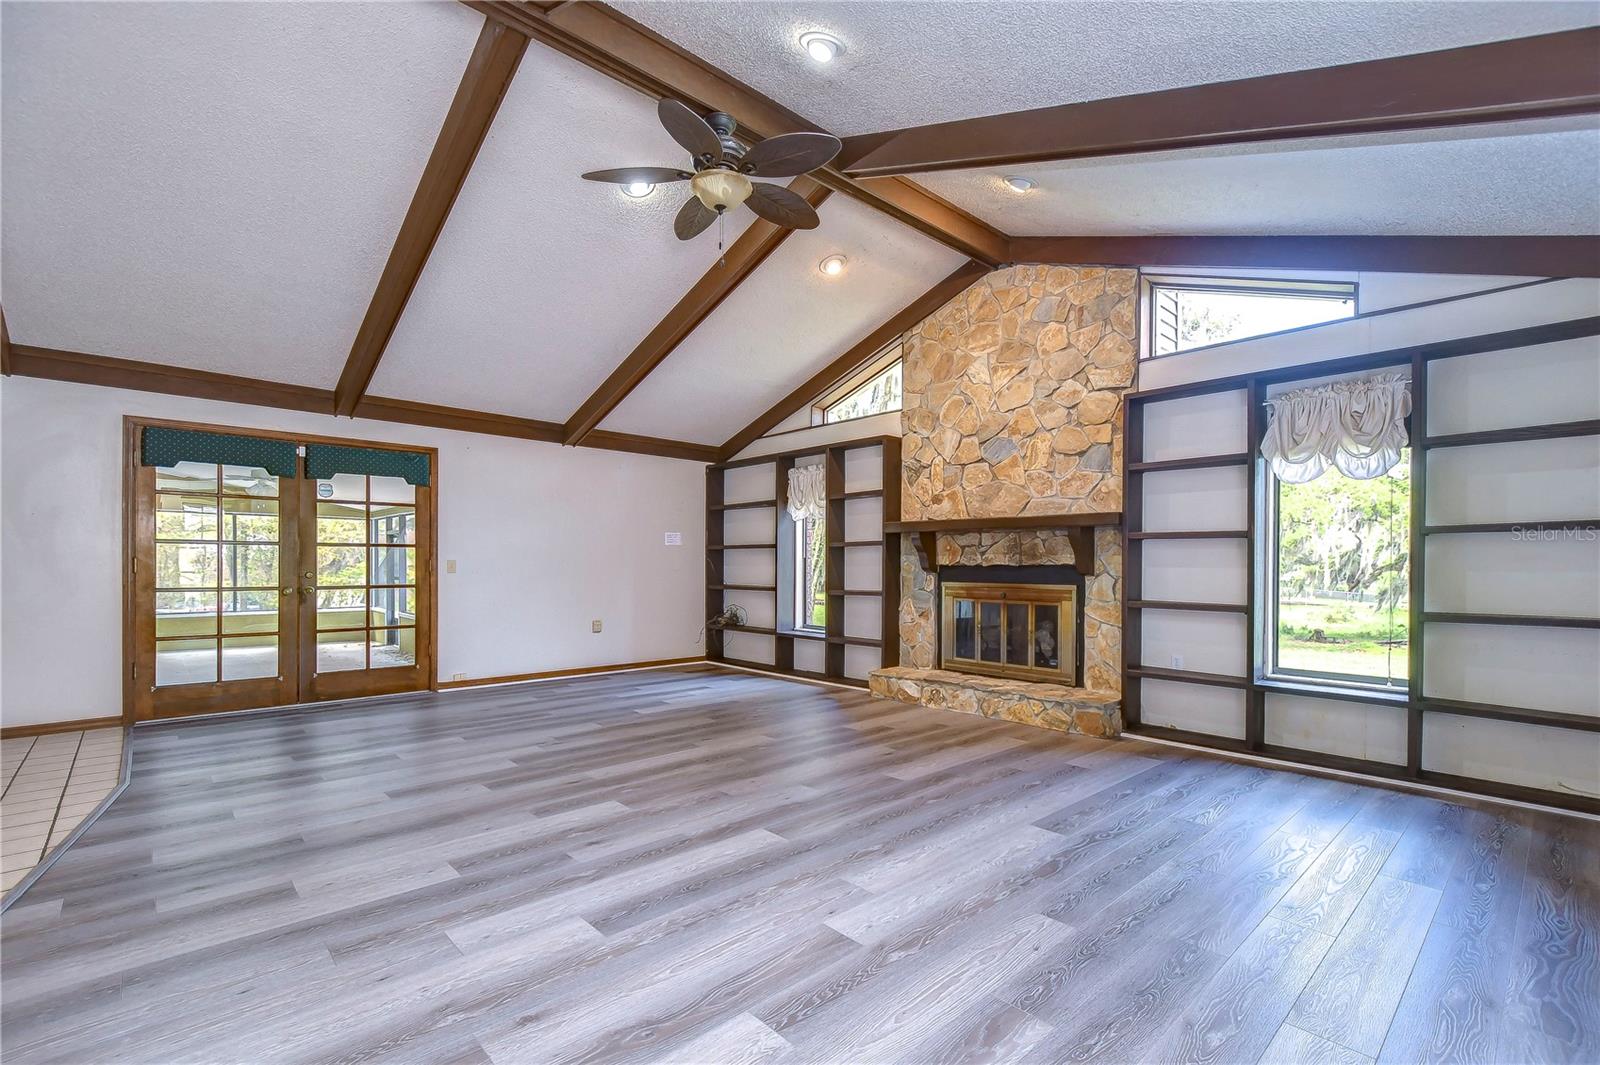 Vaulted ceiling with charming wood beams